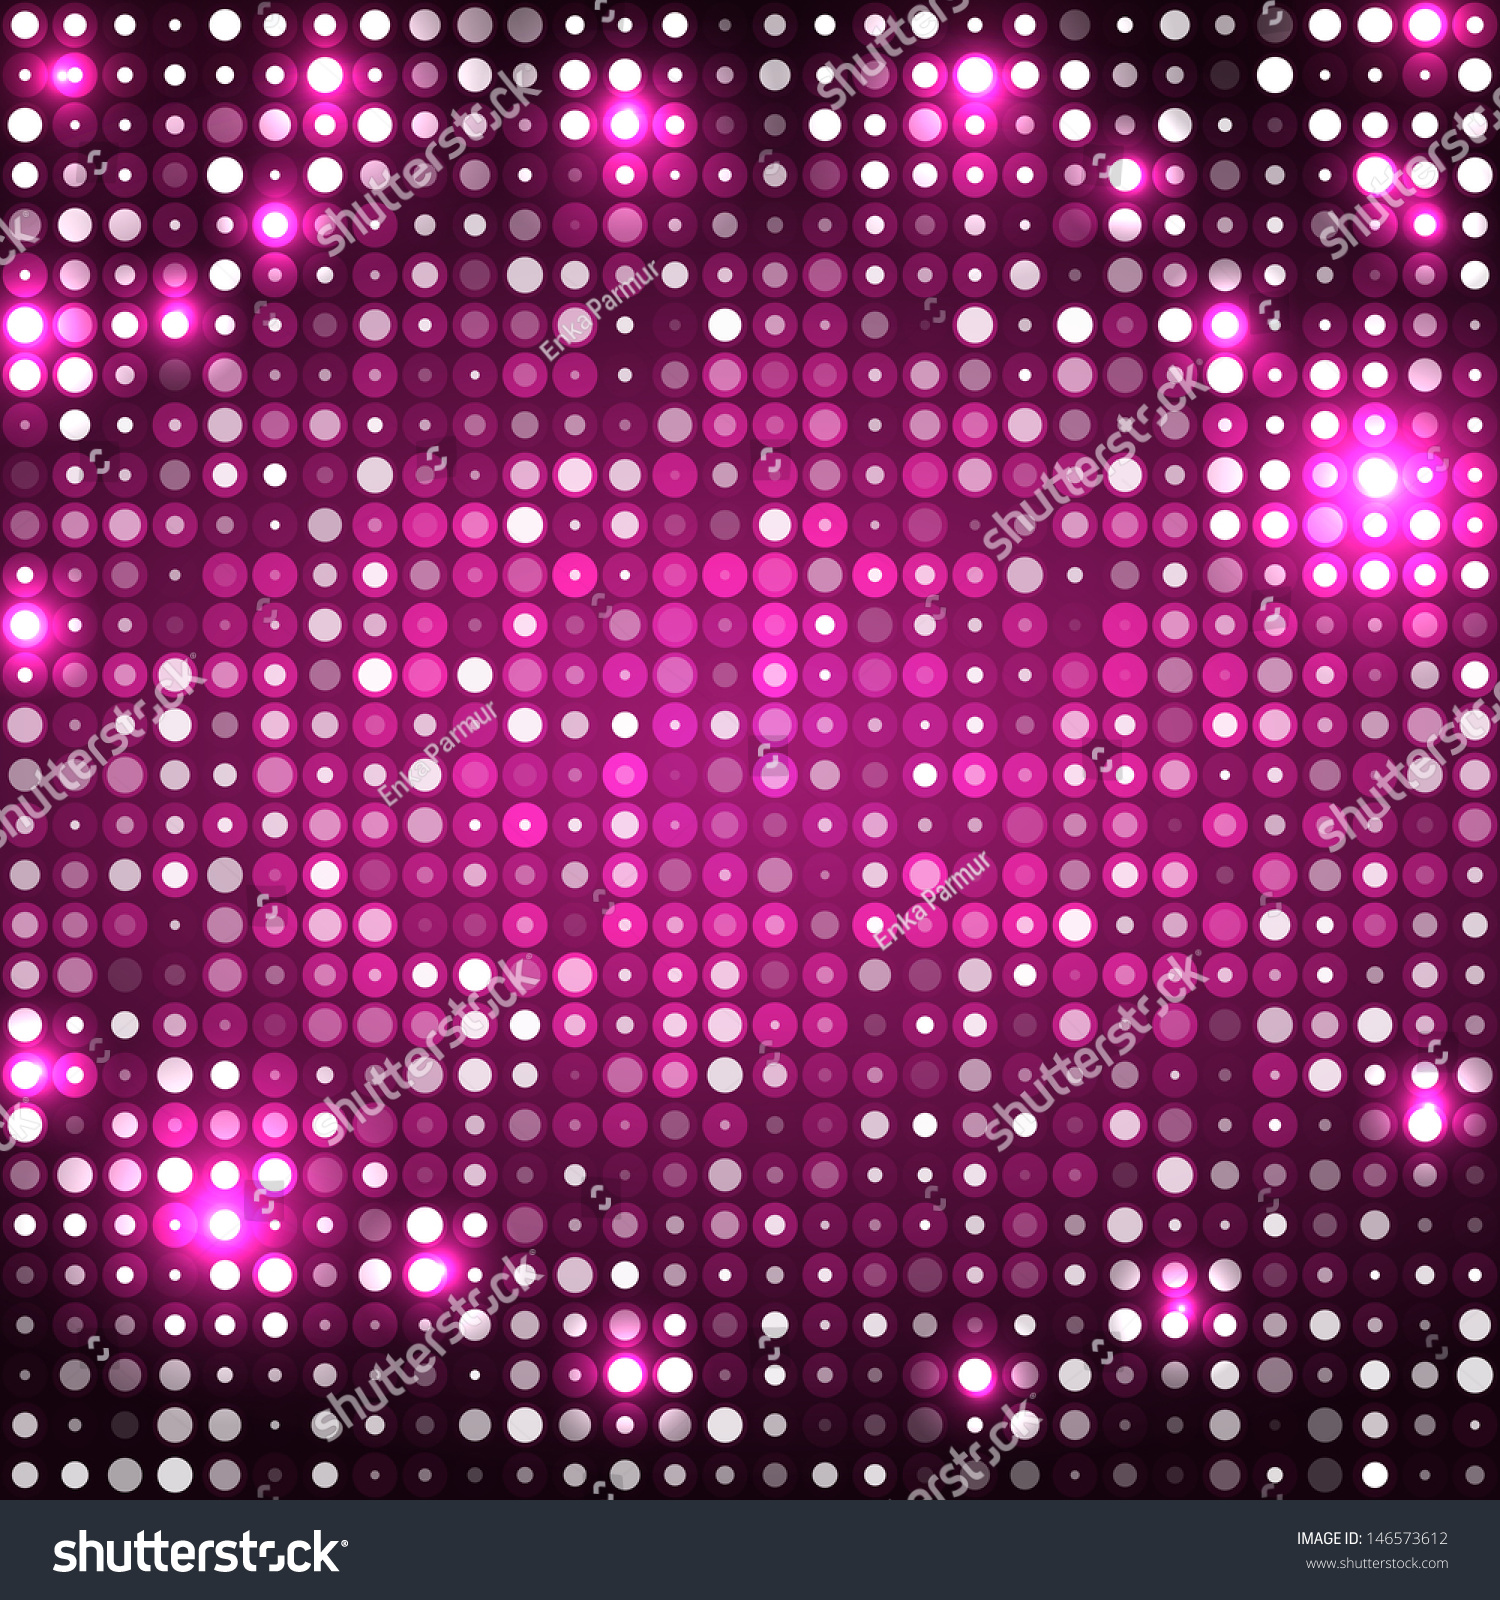 Dark Pink Abstract Sparkling Disco Background With Circles Stock Vector ...